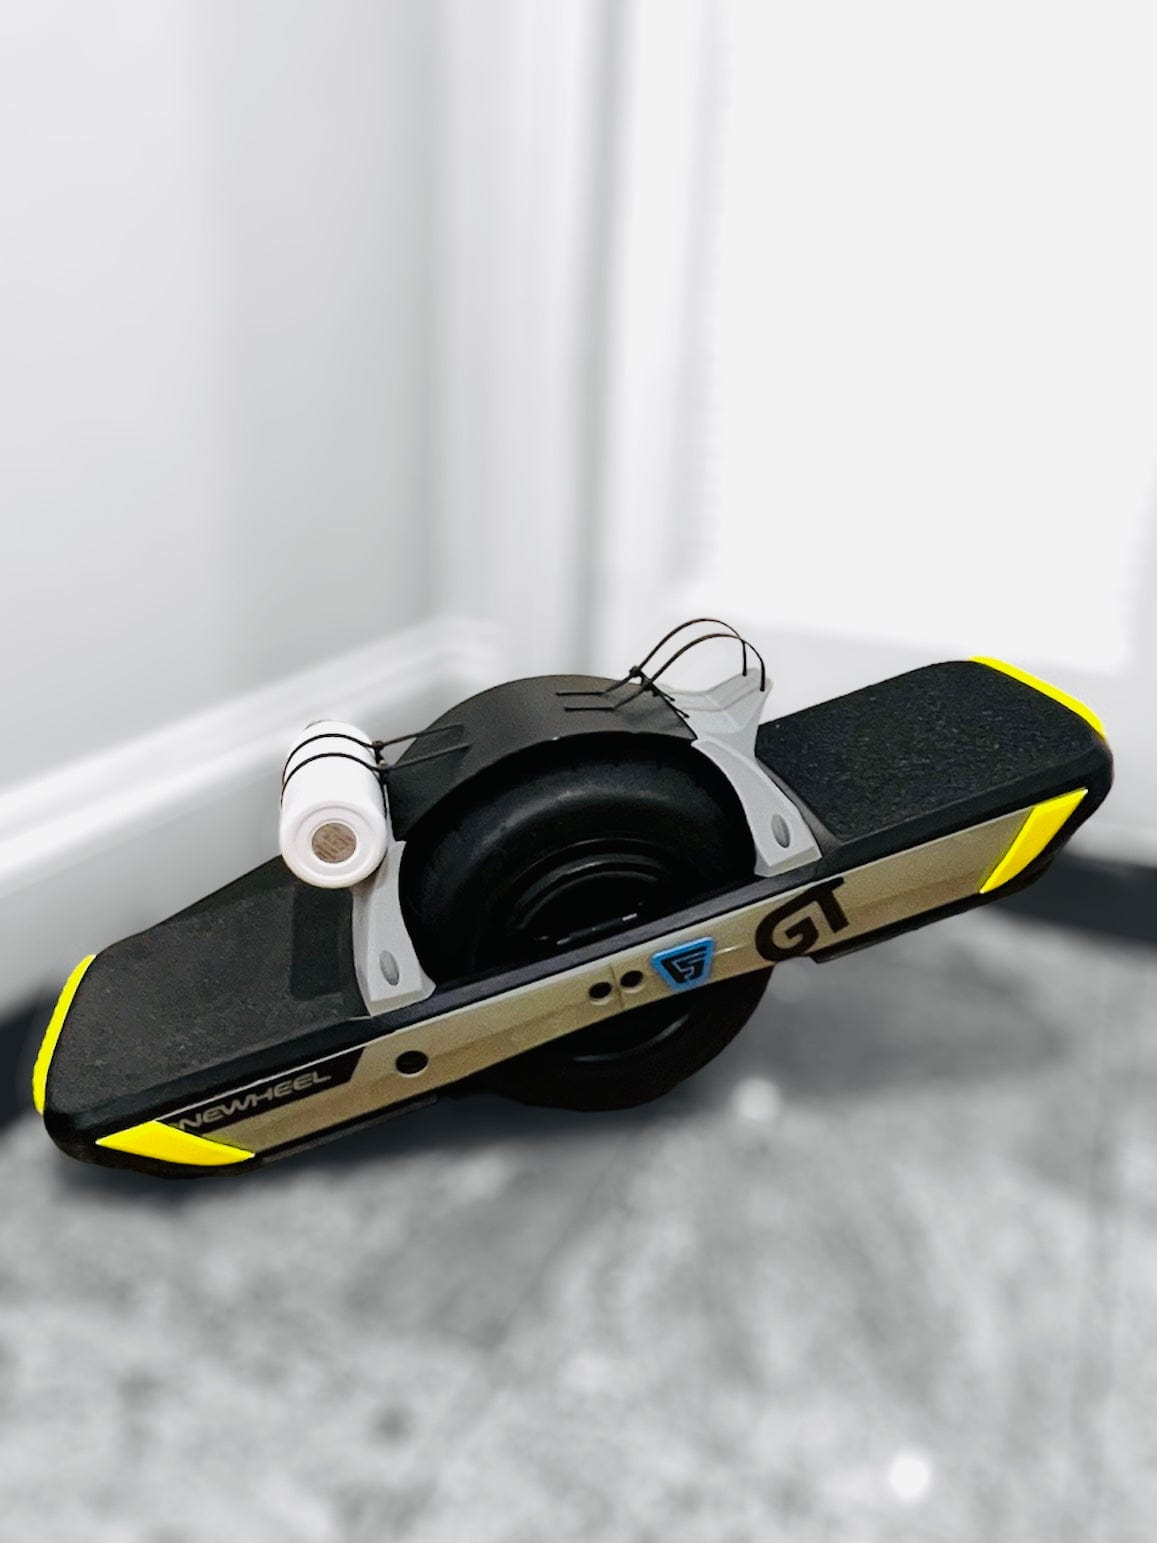 Noseguard for Onewheel GT | Footpad Sensor Protection